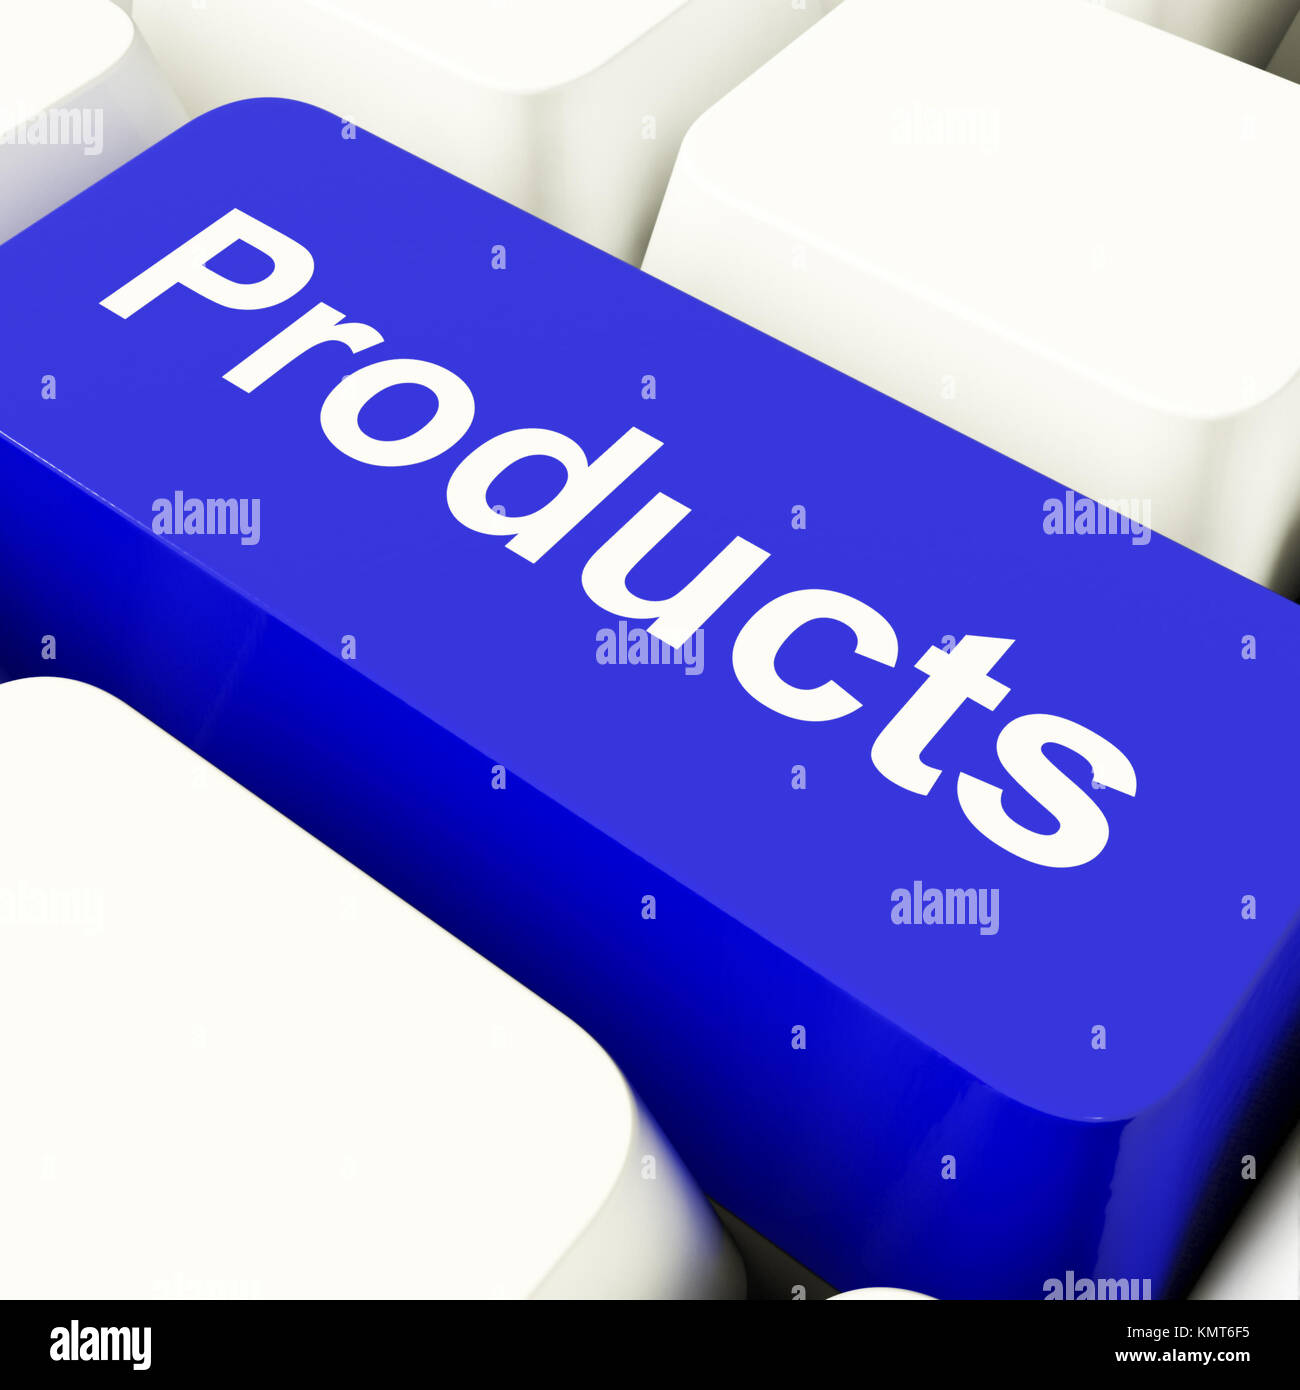 Products Computer Key In Blue Showing Internet Shopping Stock Photo